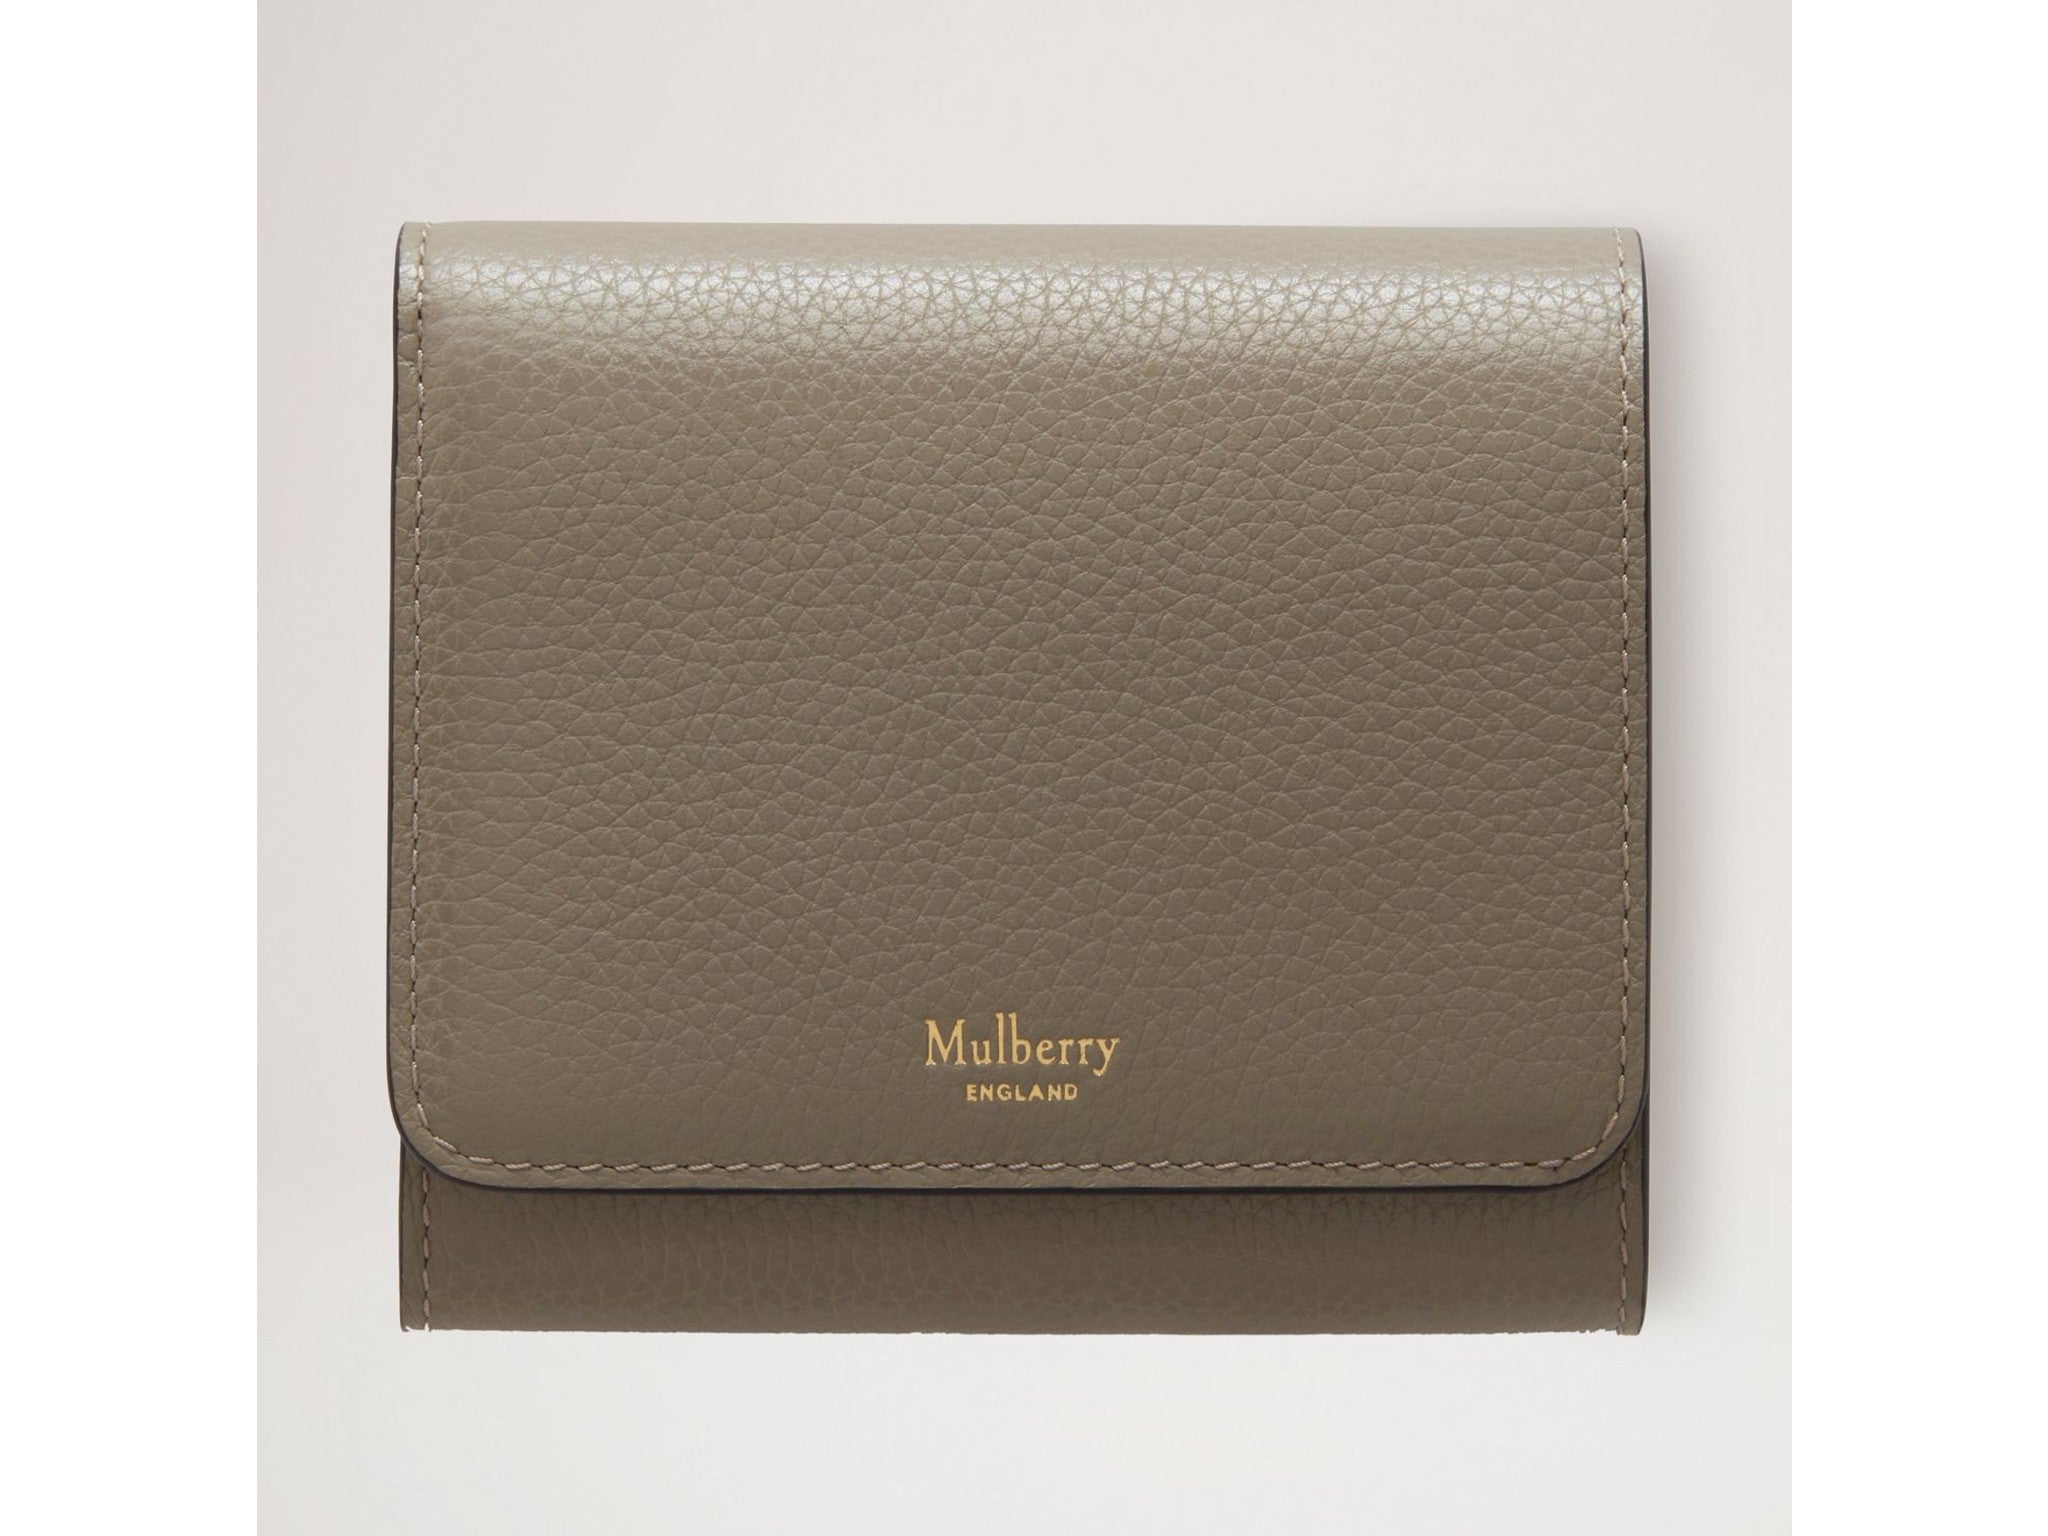 Mulberry small continental French purse indybest.jpeg